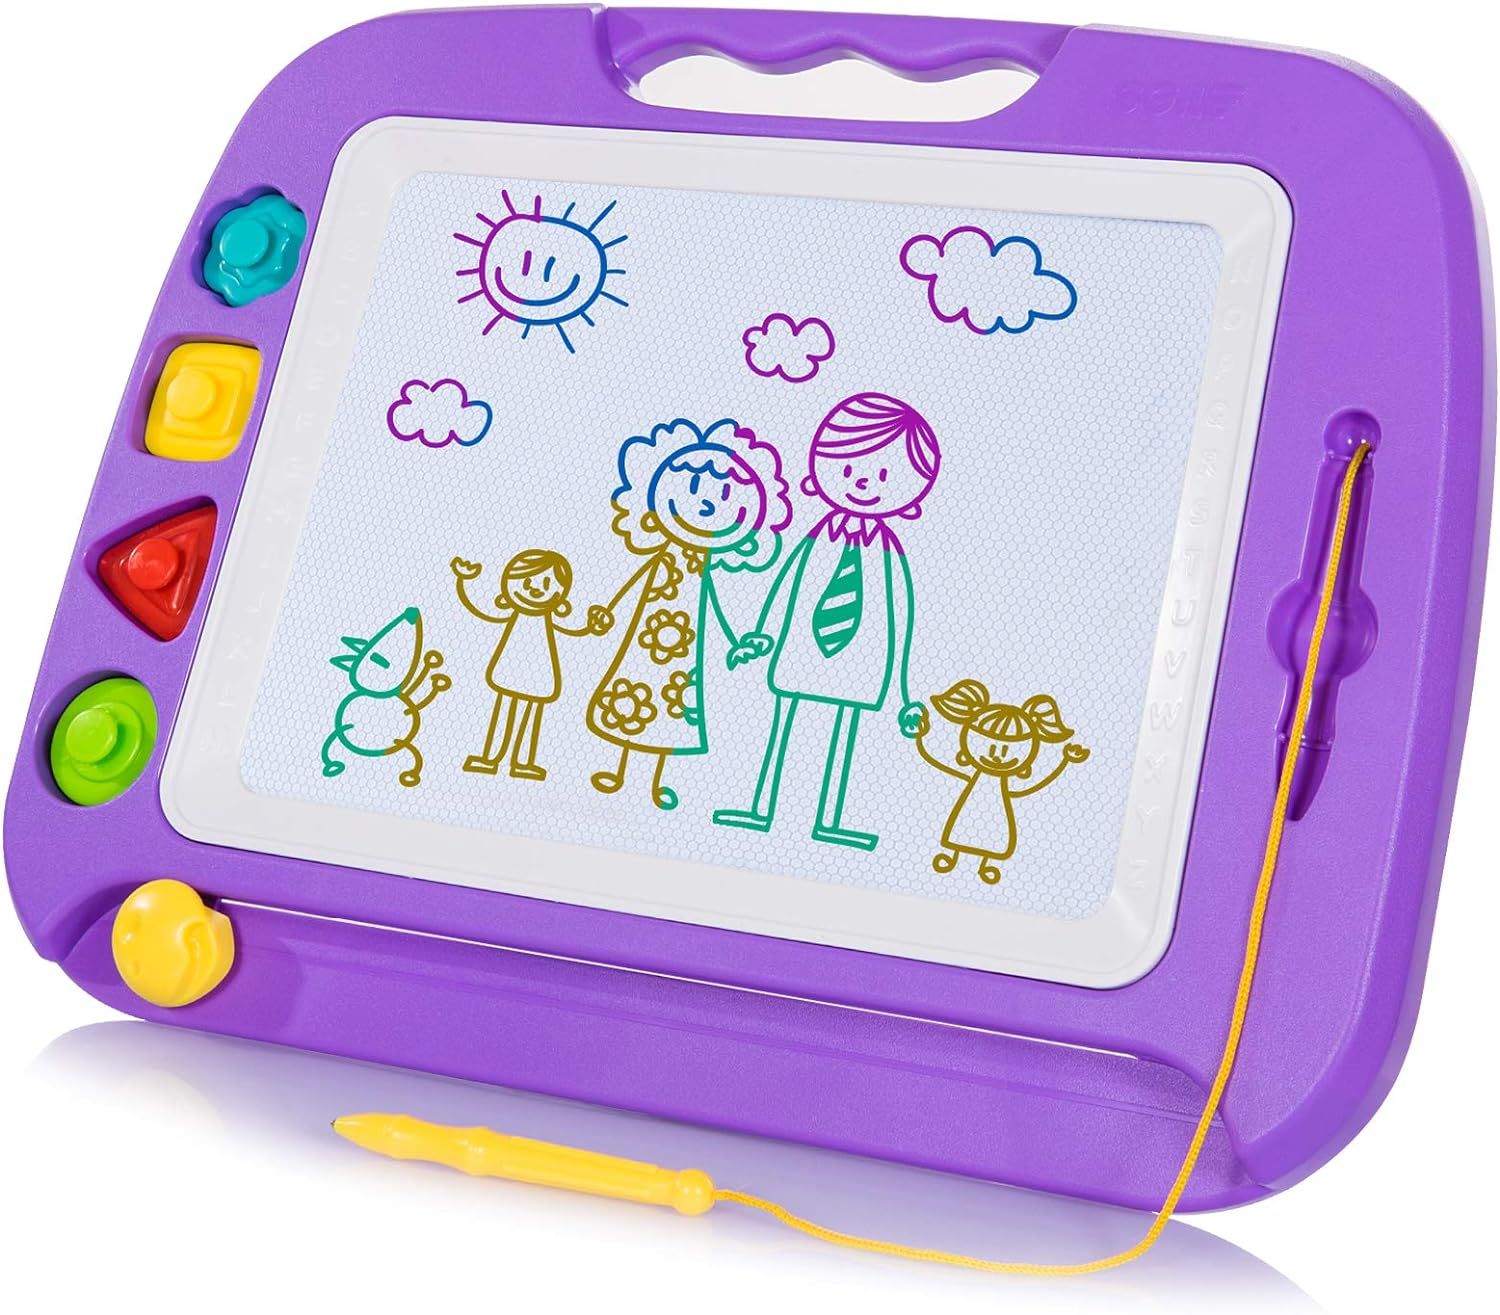 SGILE Magnetic Drawing Board Toy for Kids, Large Doodle Board Writing Painting Sketch Pad, Purple | Amazon (US)